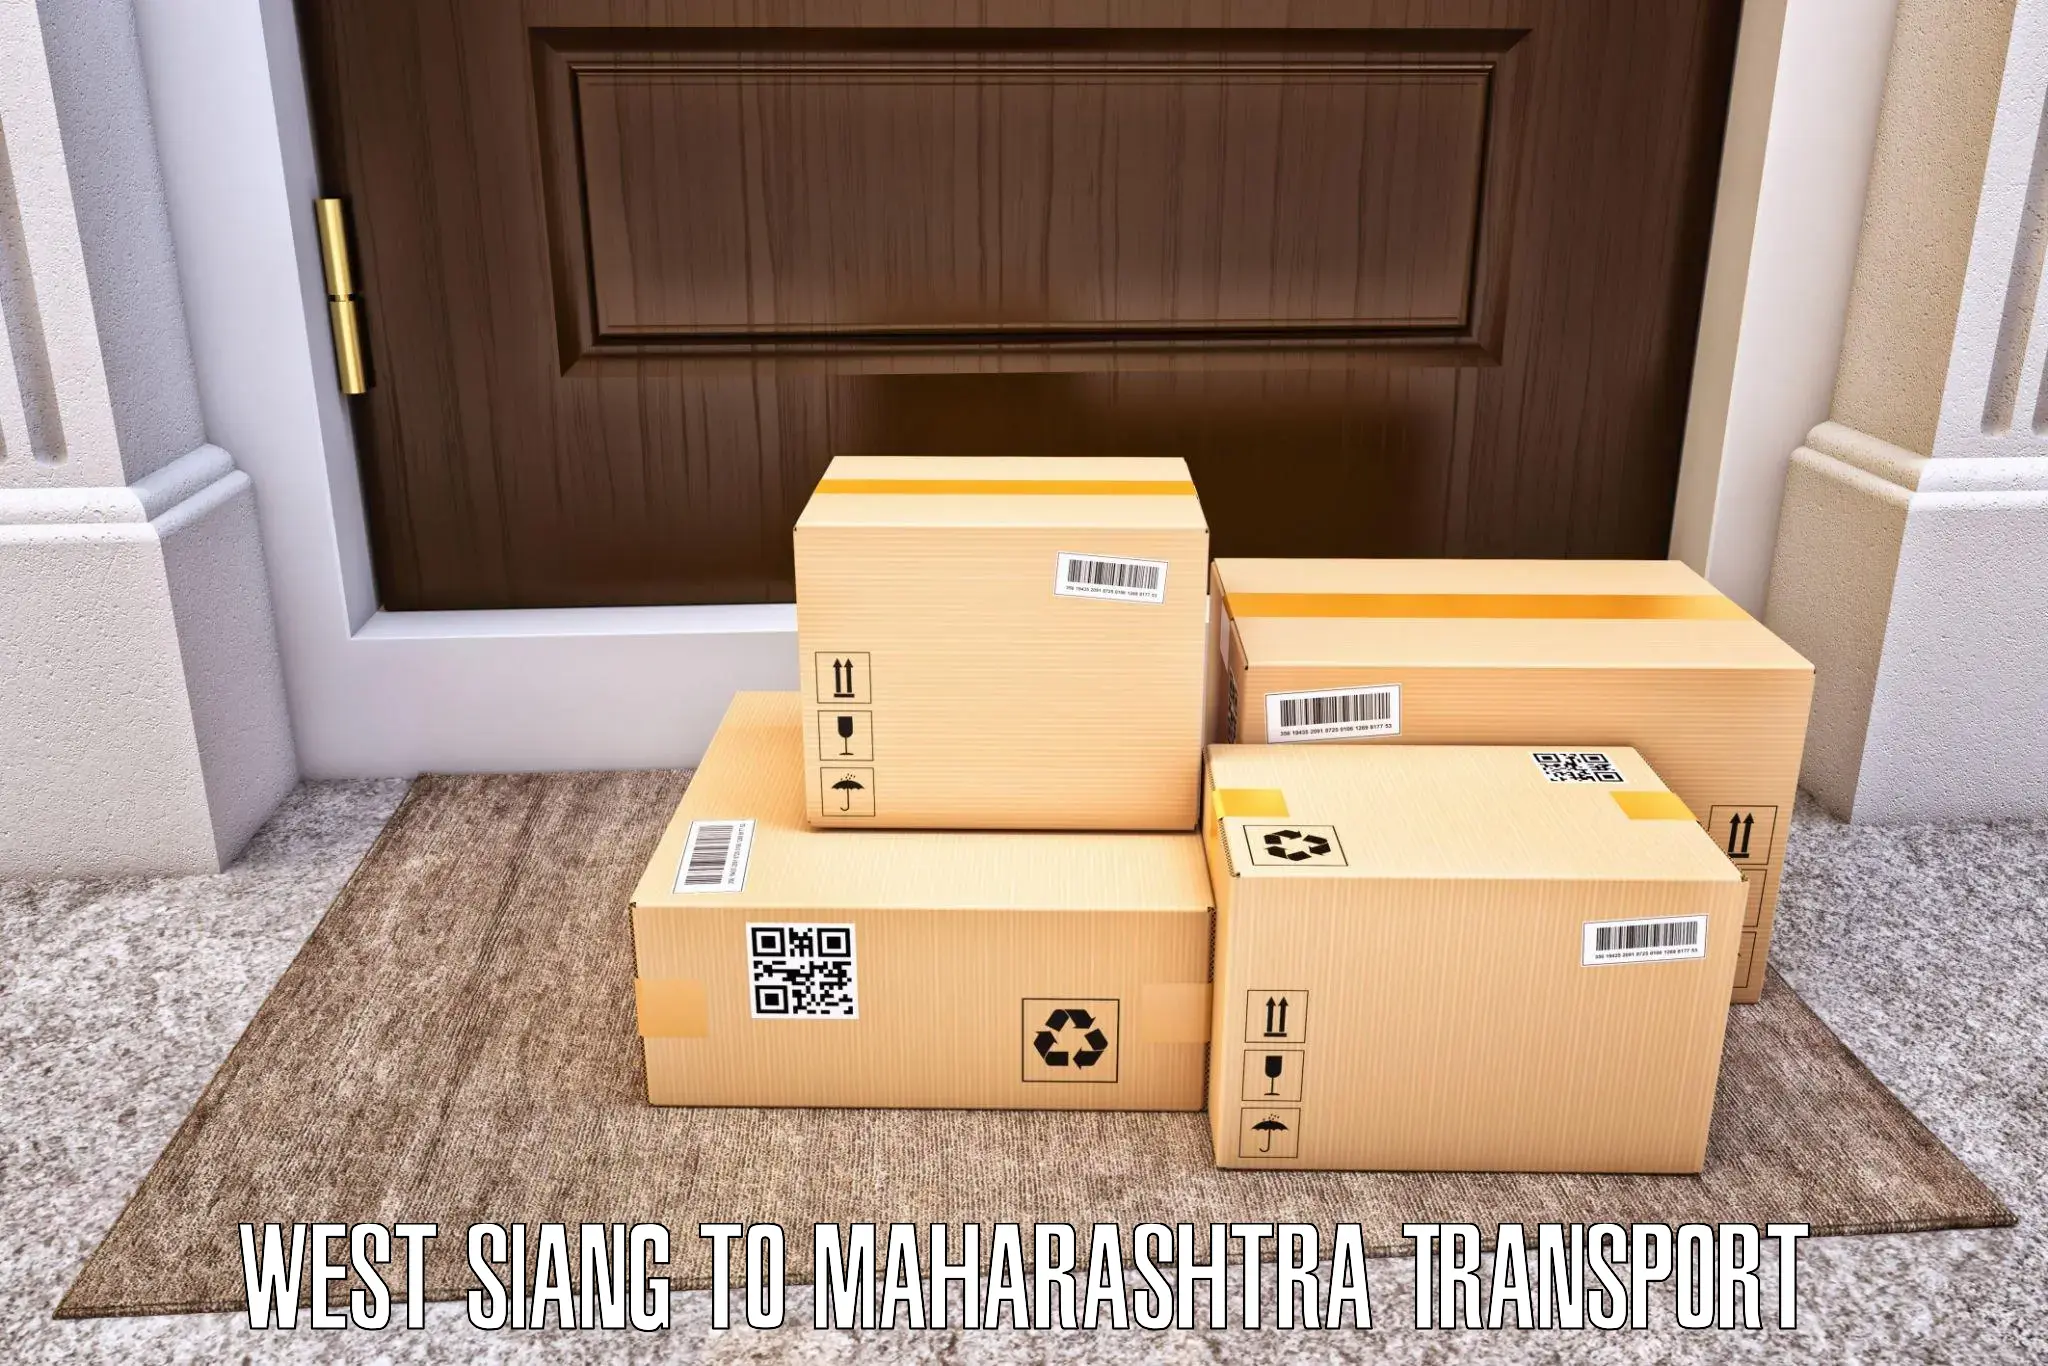 Container transportation services West Siang to Shahada